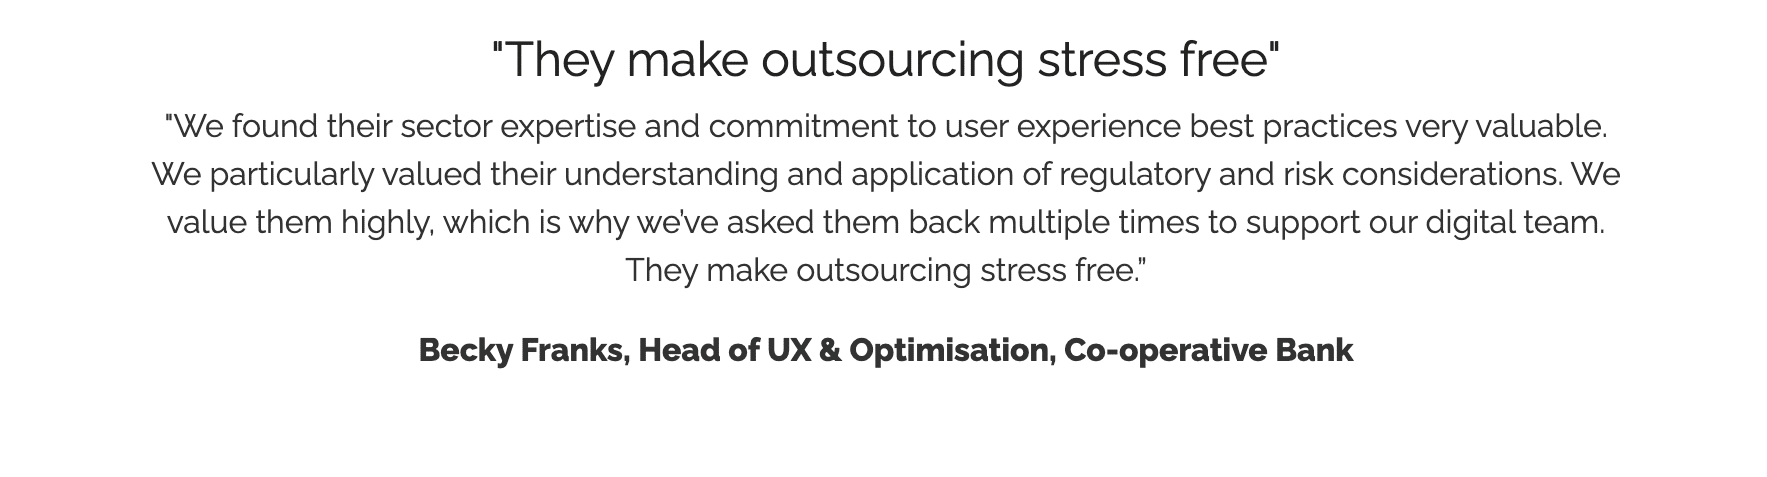 "They make outsourcing stress free" "We found their sector expertise and commitment to user experience best practices very valuable. We particularly valued their understanding and application of regulatory and risk considerations. We value them highly, which is why we’ve asked them back multiple times to support our digital team. They make outsourcing stress free.” Becky Franks, Head of UX & Optimisation, Co-operative Bank